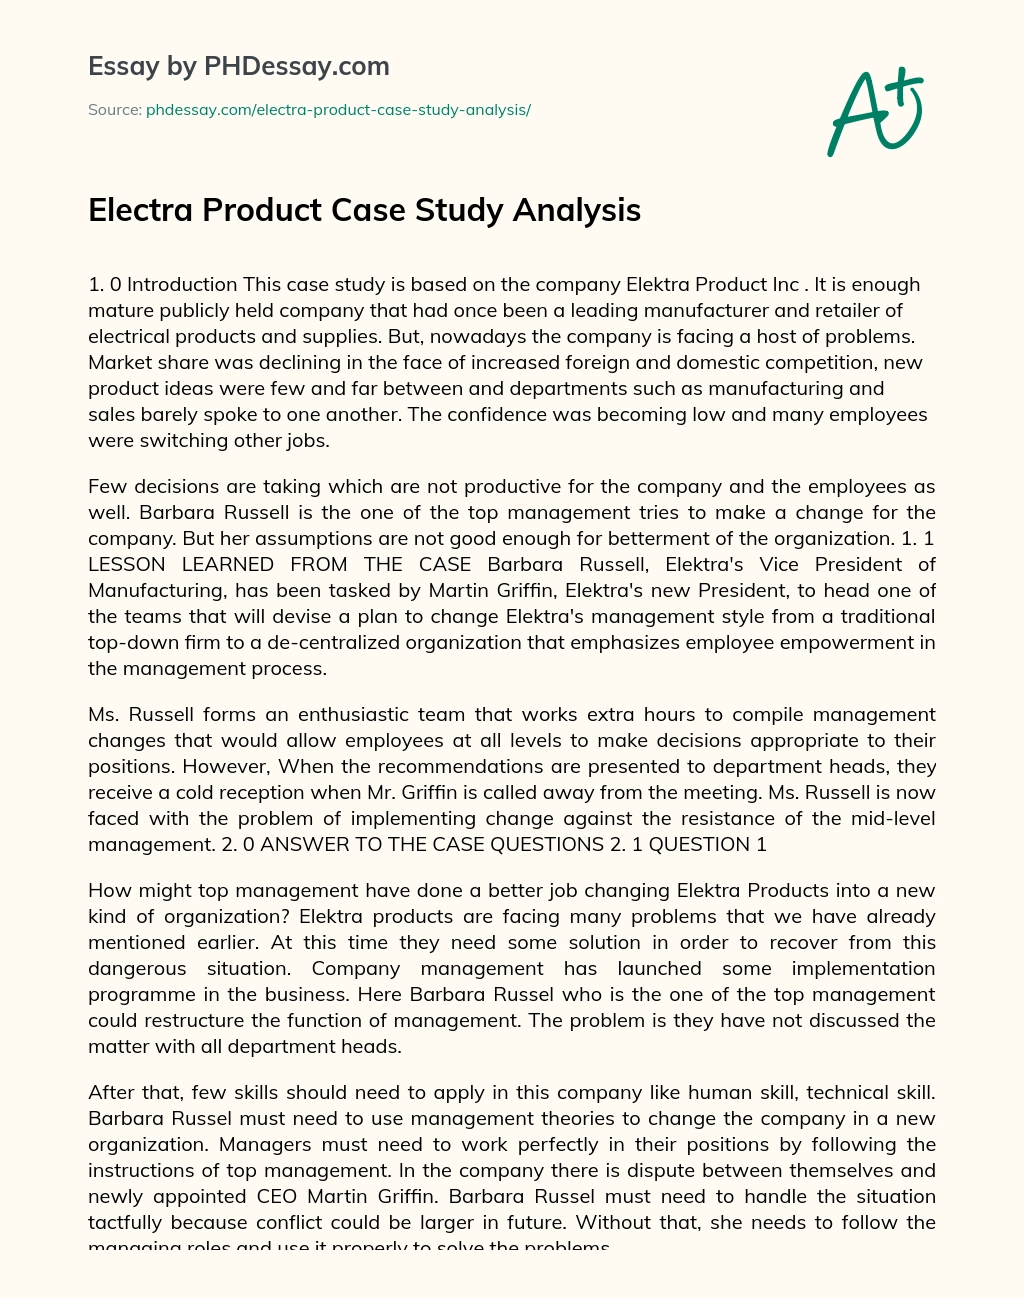 Electra Product Case Study Analysis essay